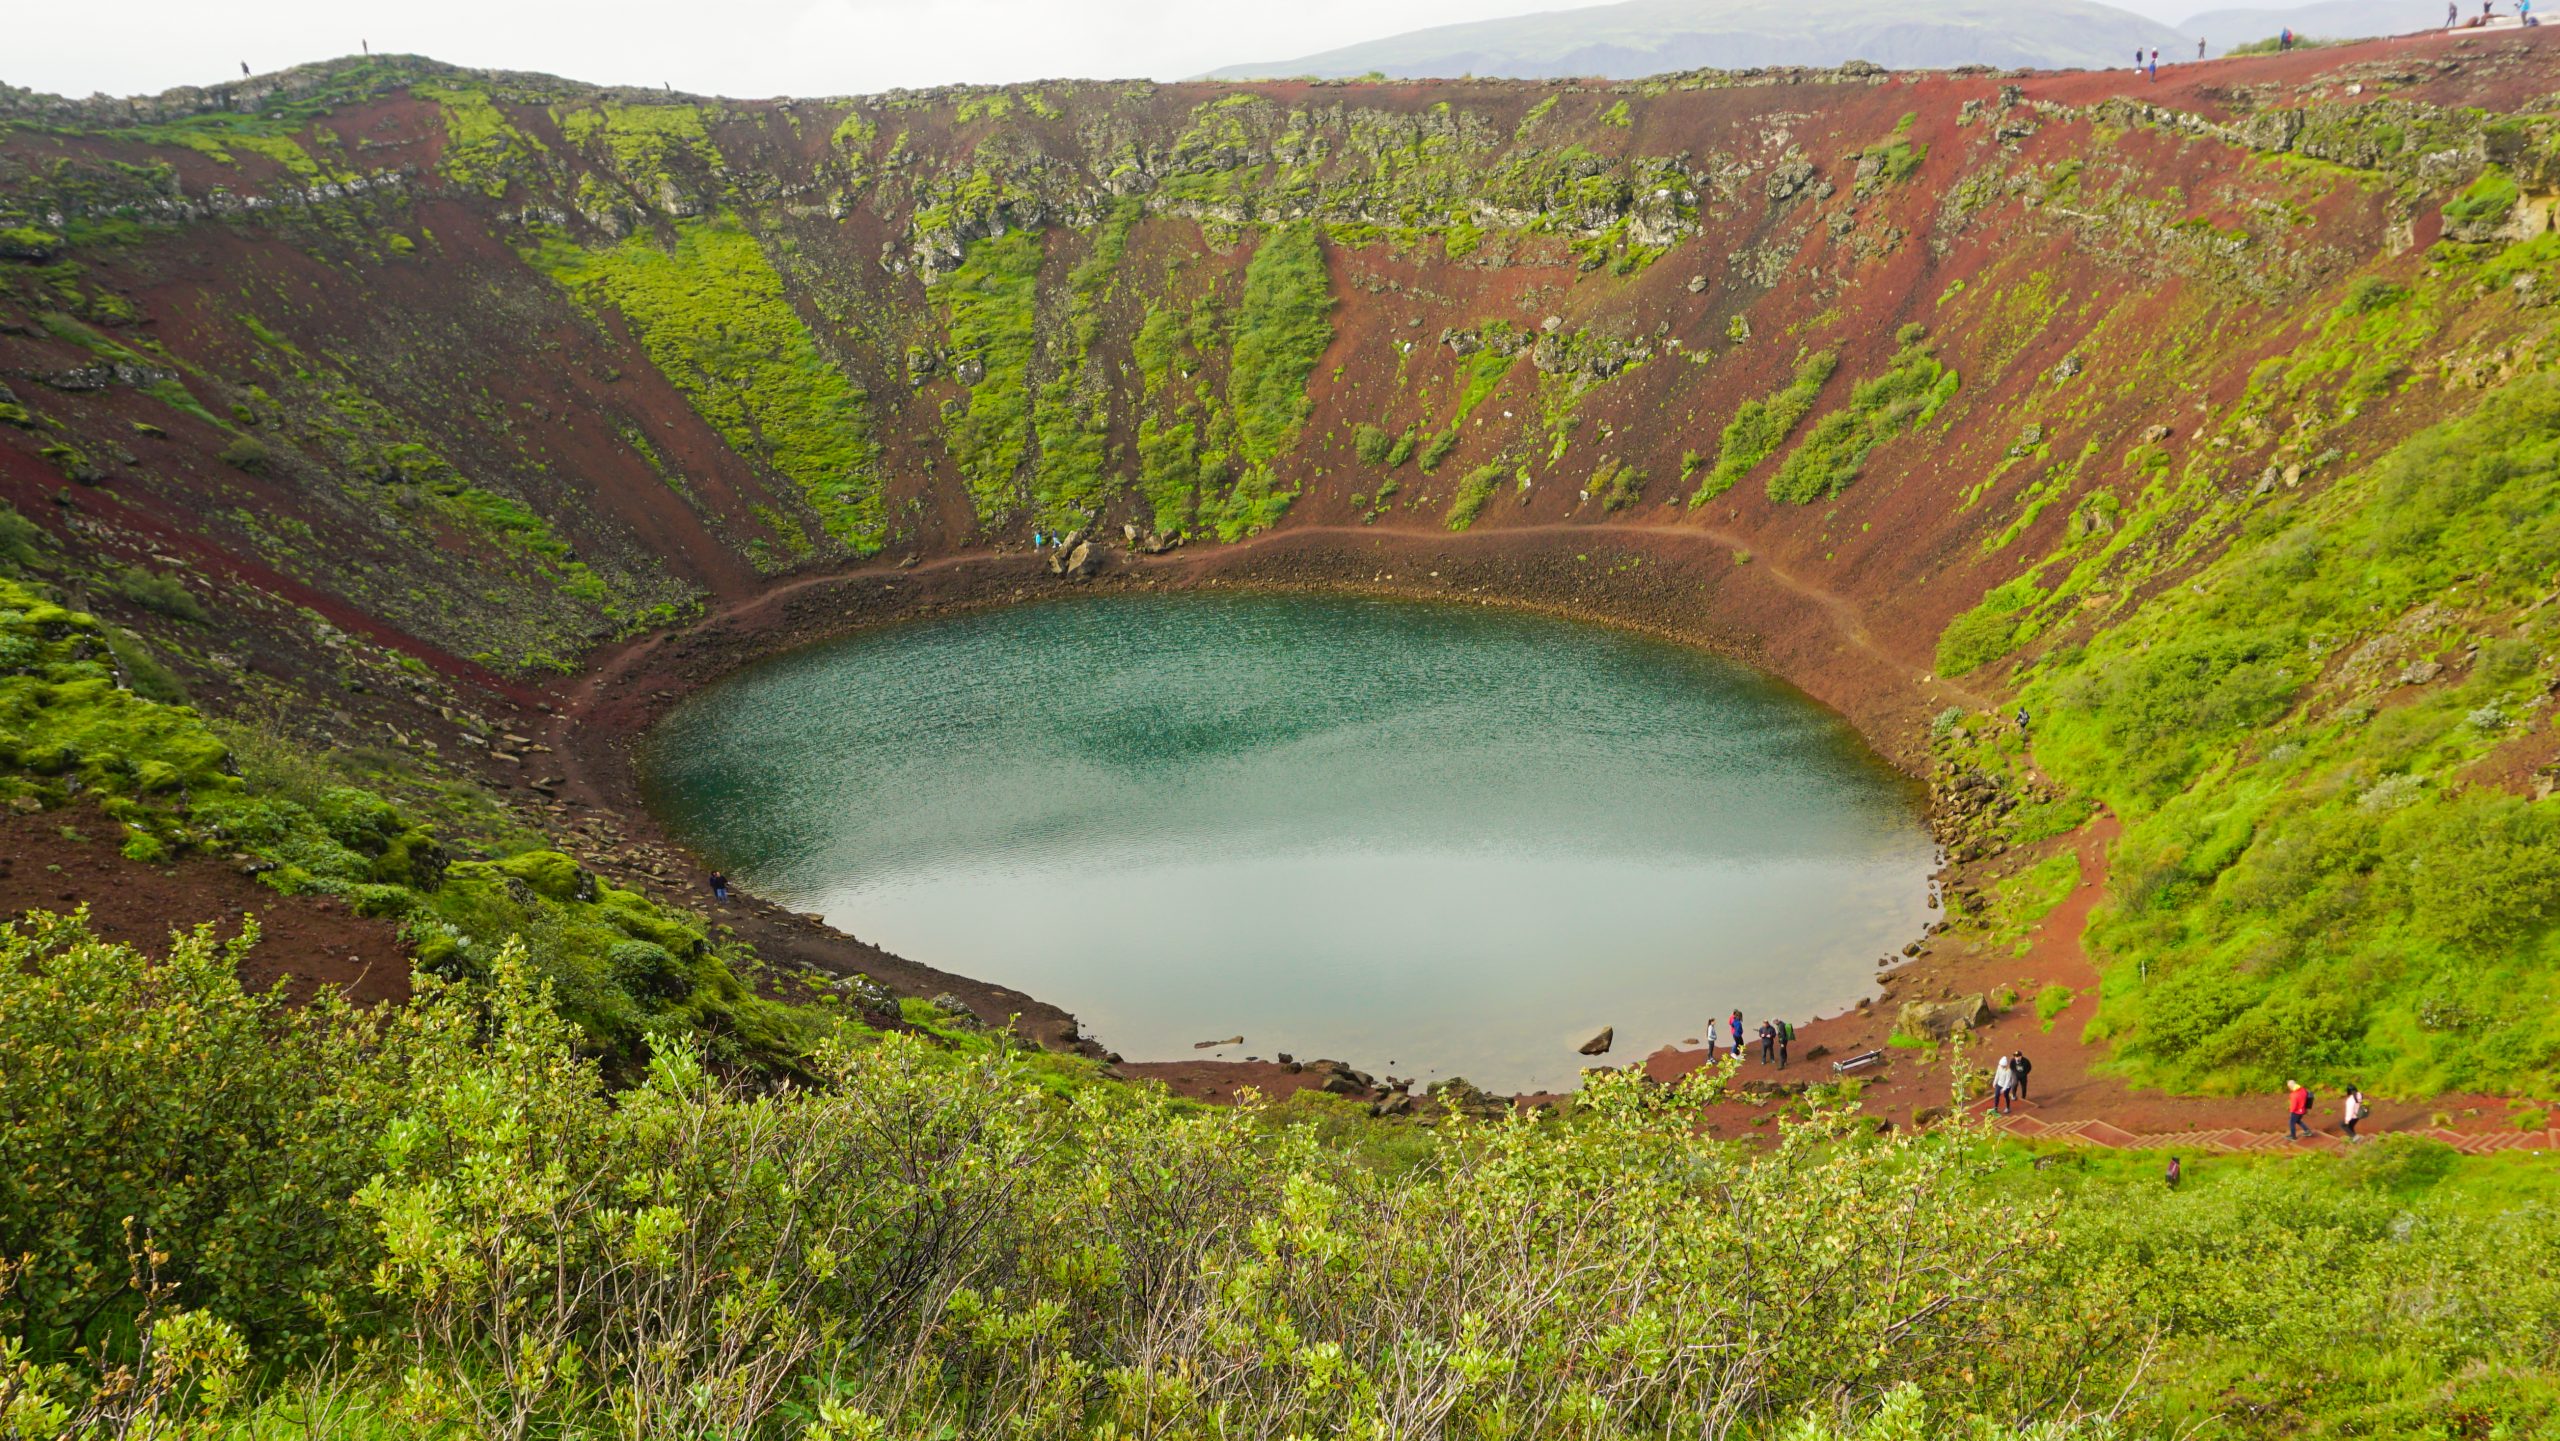 A lake inside a volcanic crater